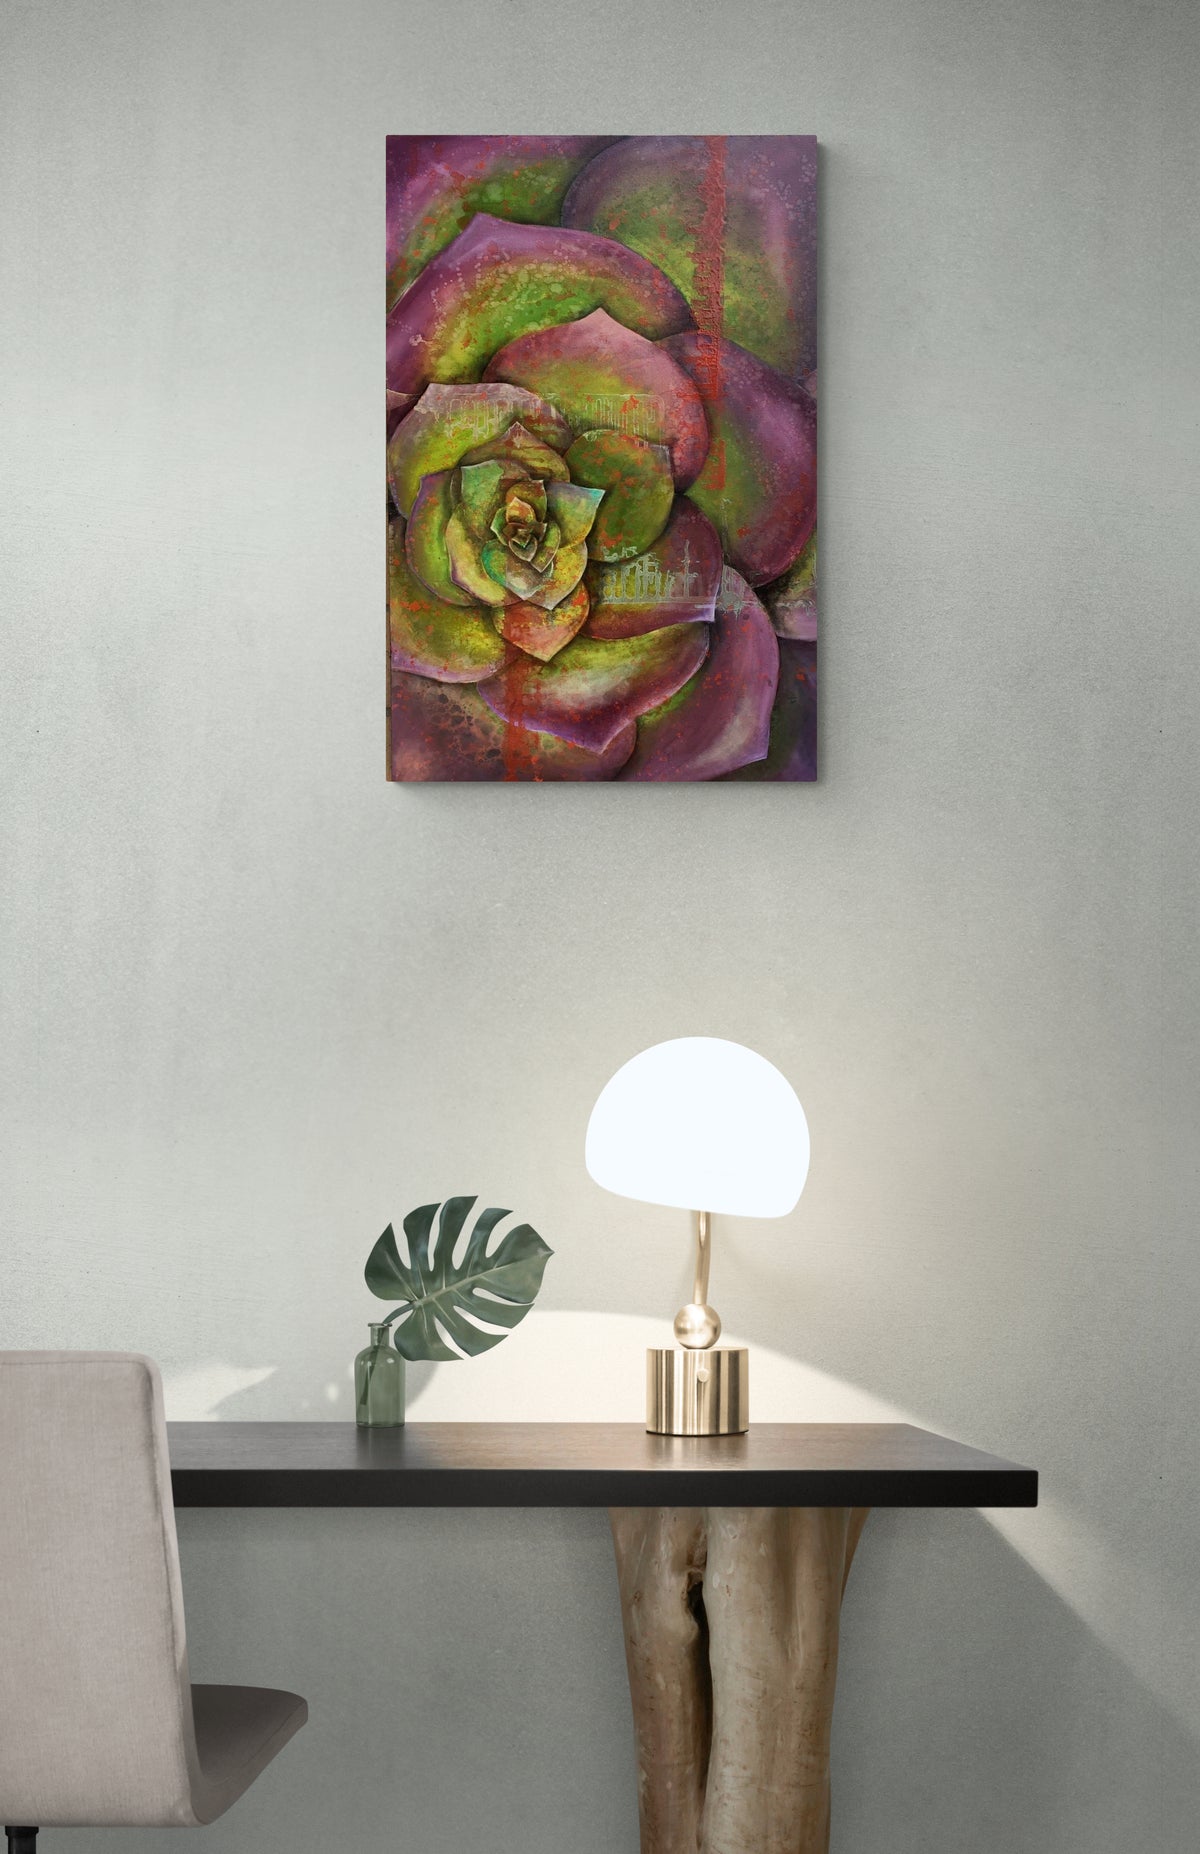 Green & Purple Plant Still Life Painting adds color & nature to this modern office